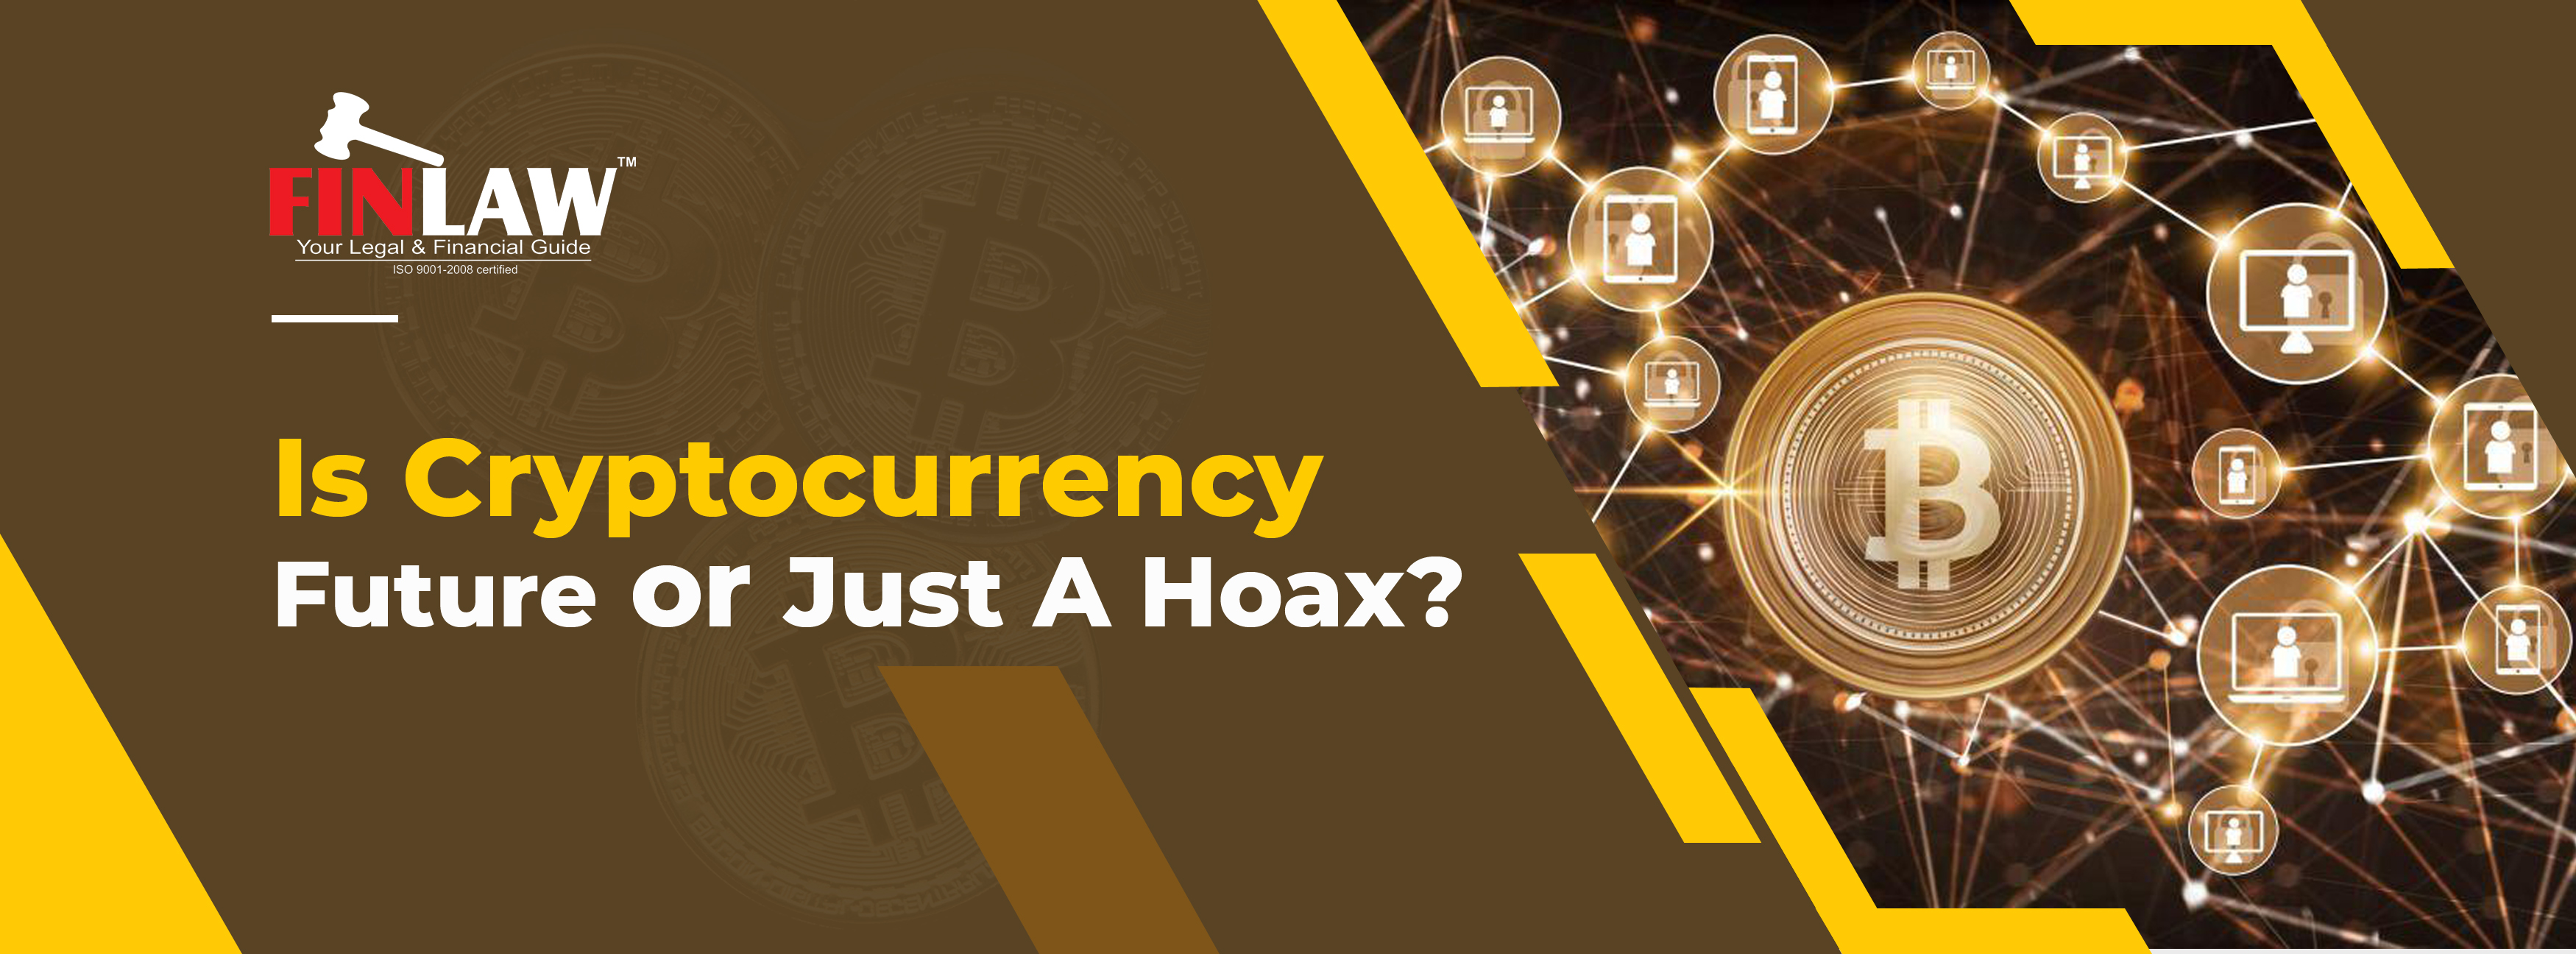 Is Cryptocurrency Future or Just A Hoax?